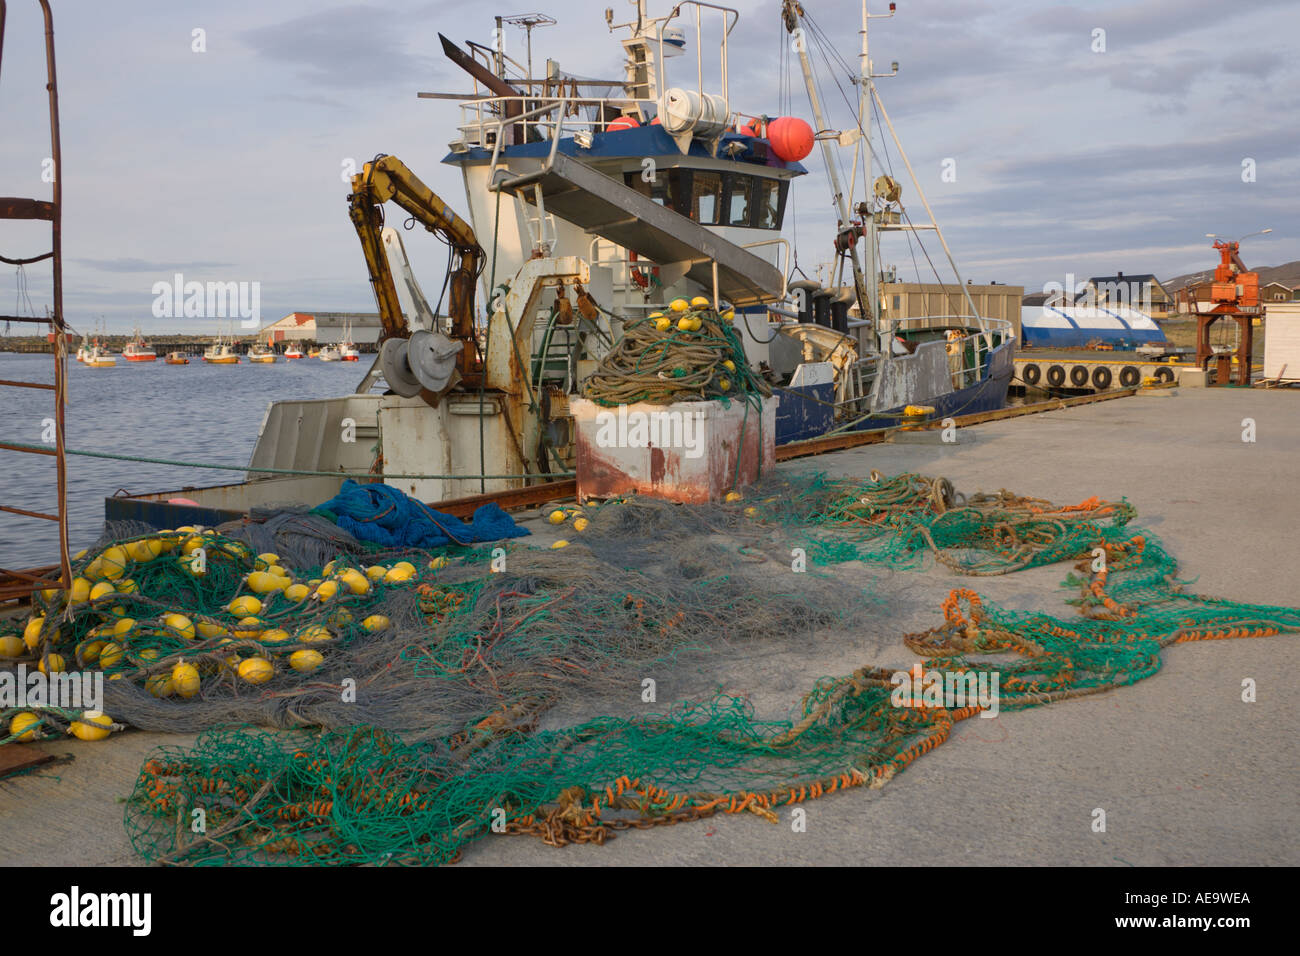 Fishing boat and nets at Berlevag Harbour Finnmark Norway Stock Photo